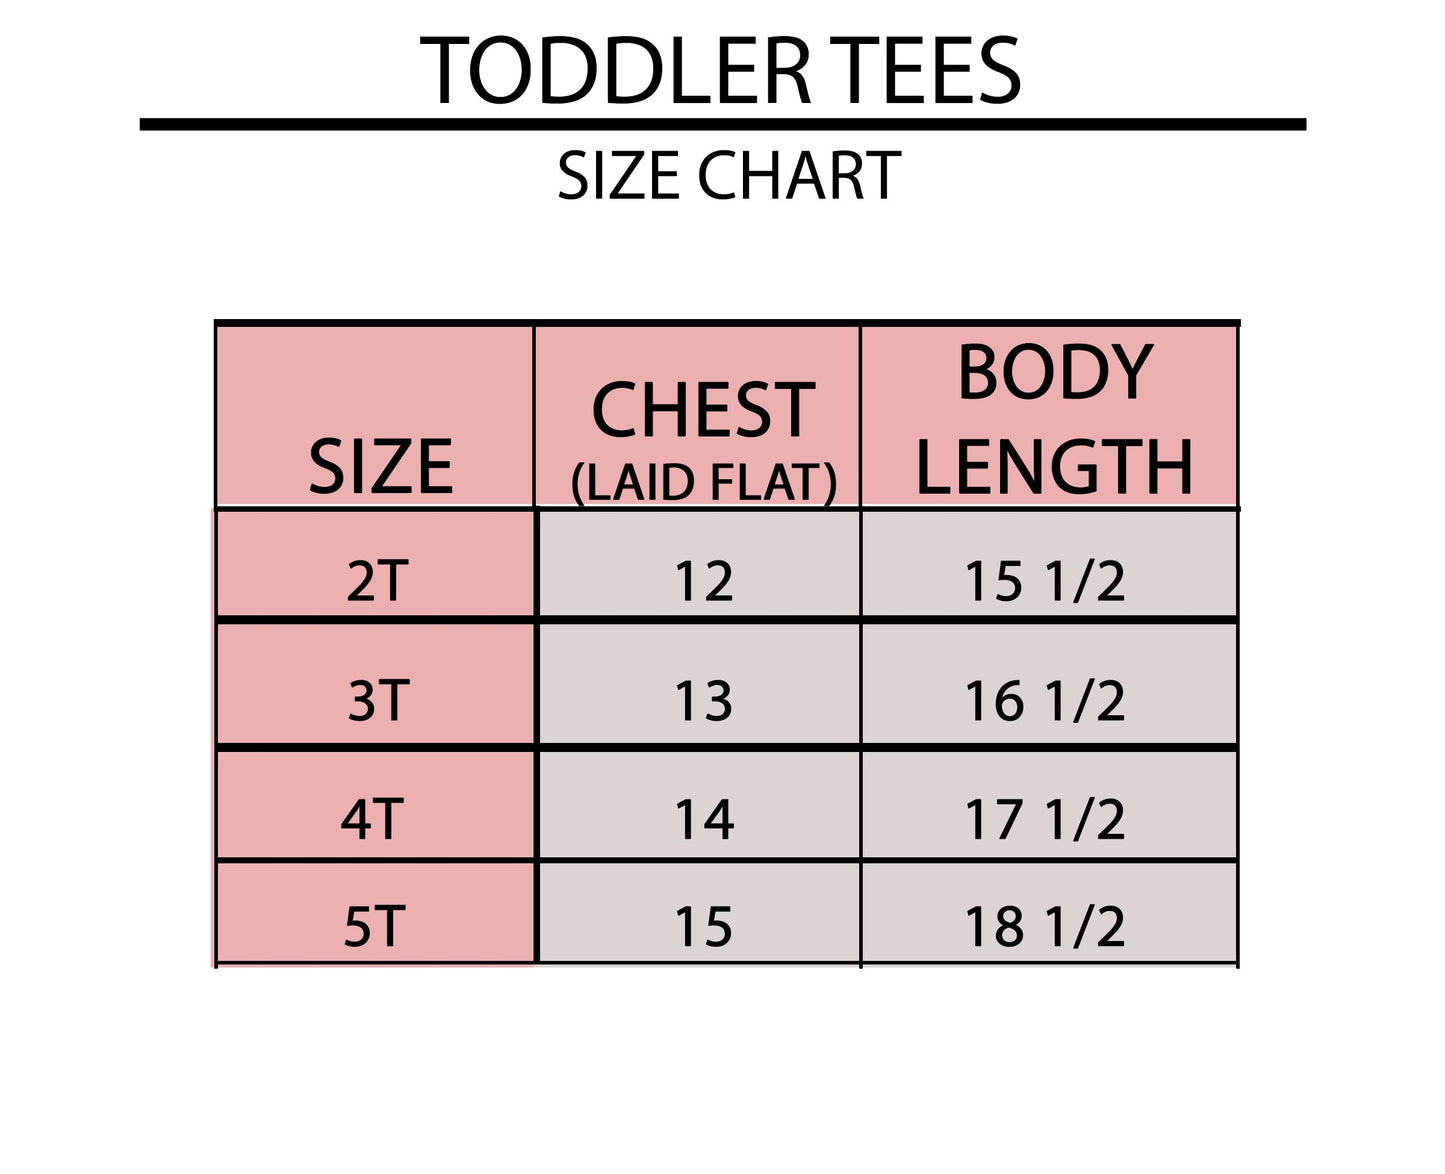 Fish And Trees | Toddler Short Sleeve Crew Neck